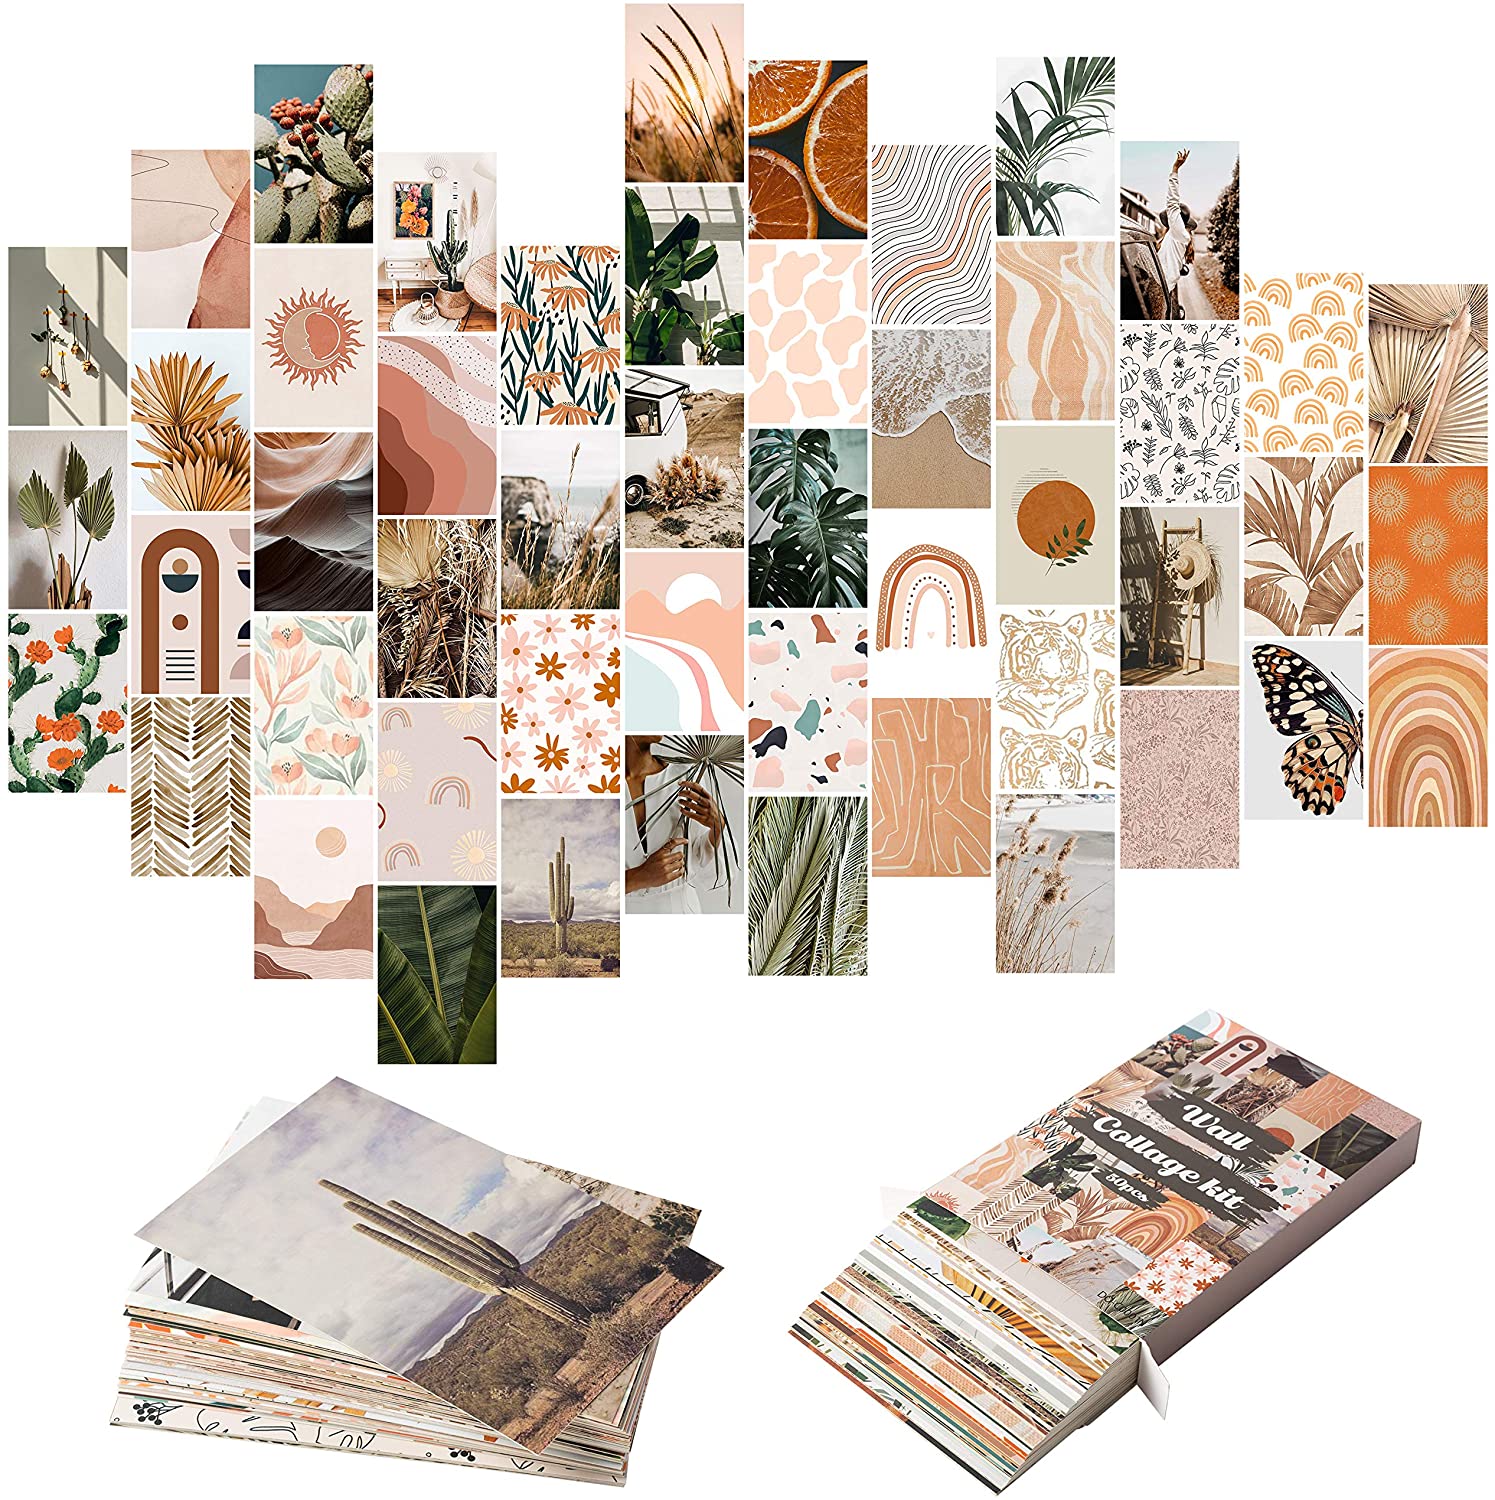 YINGENIVA 50PCS Boho Aesthetic Picture Wall Collage Kit, Peach Teal Photo Collection Collage Dorm Decor for Girl Teens and Women, Orange Boho Wall Prints Kit, Small Posters for Room Bedroom Aesthetic